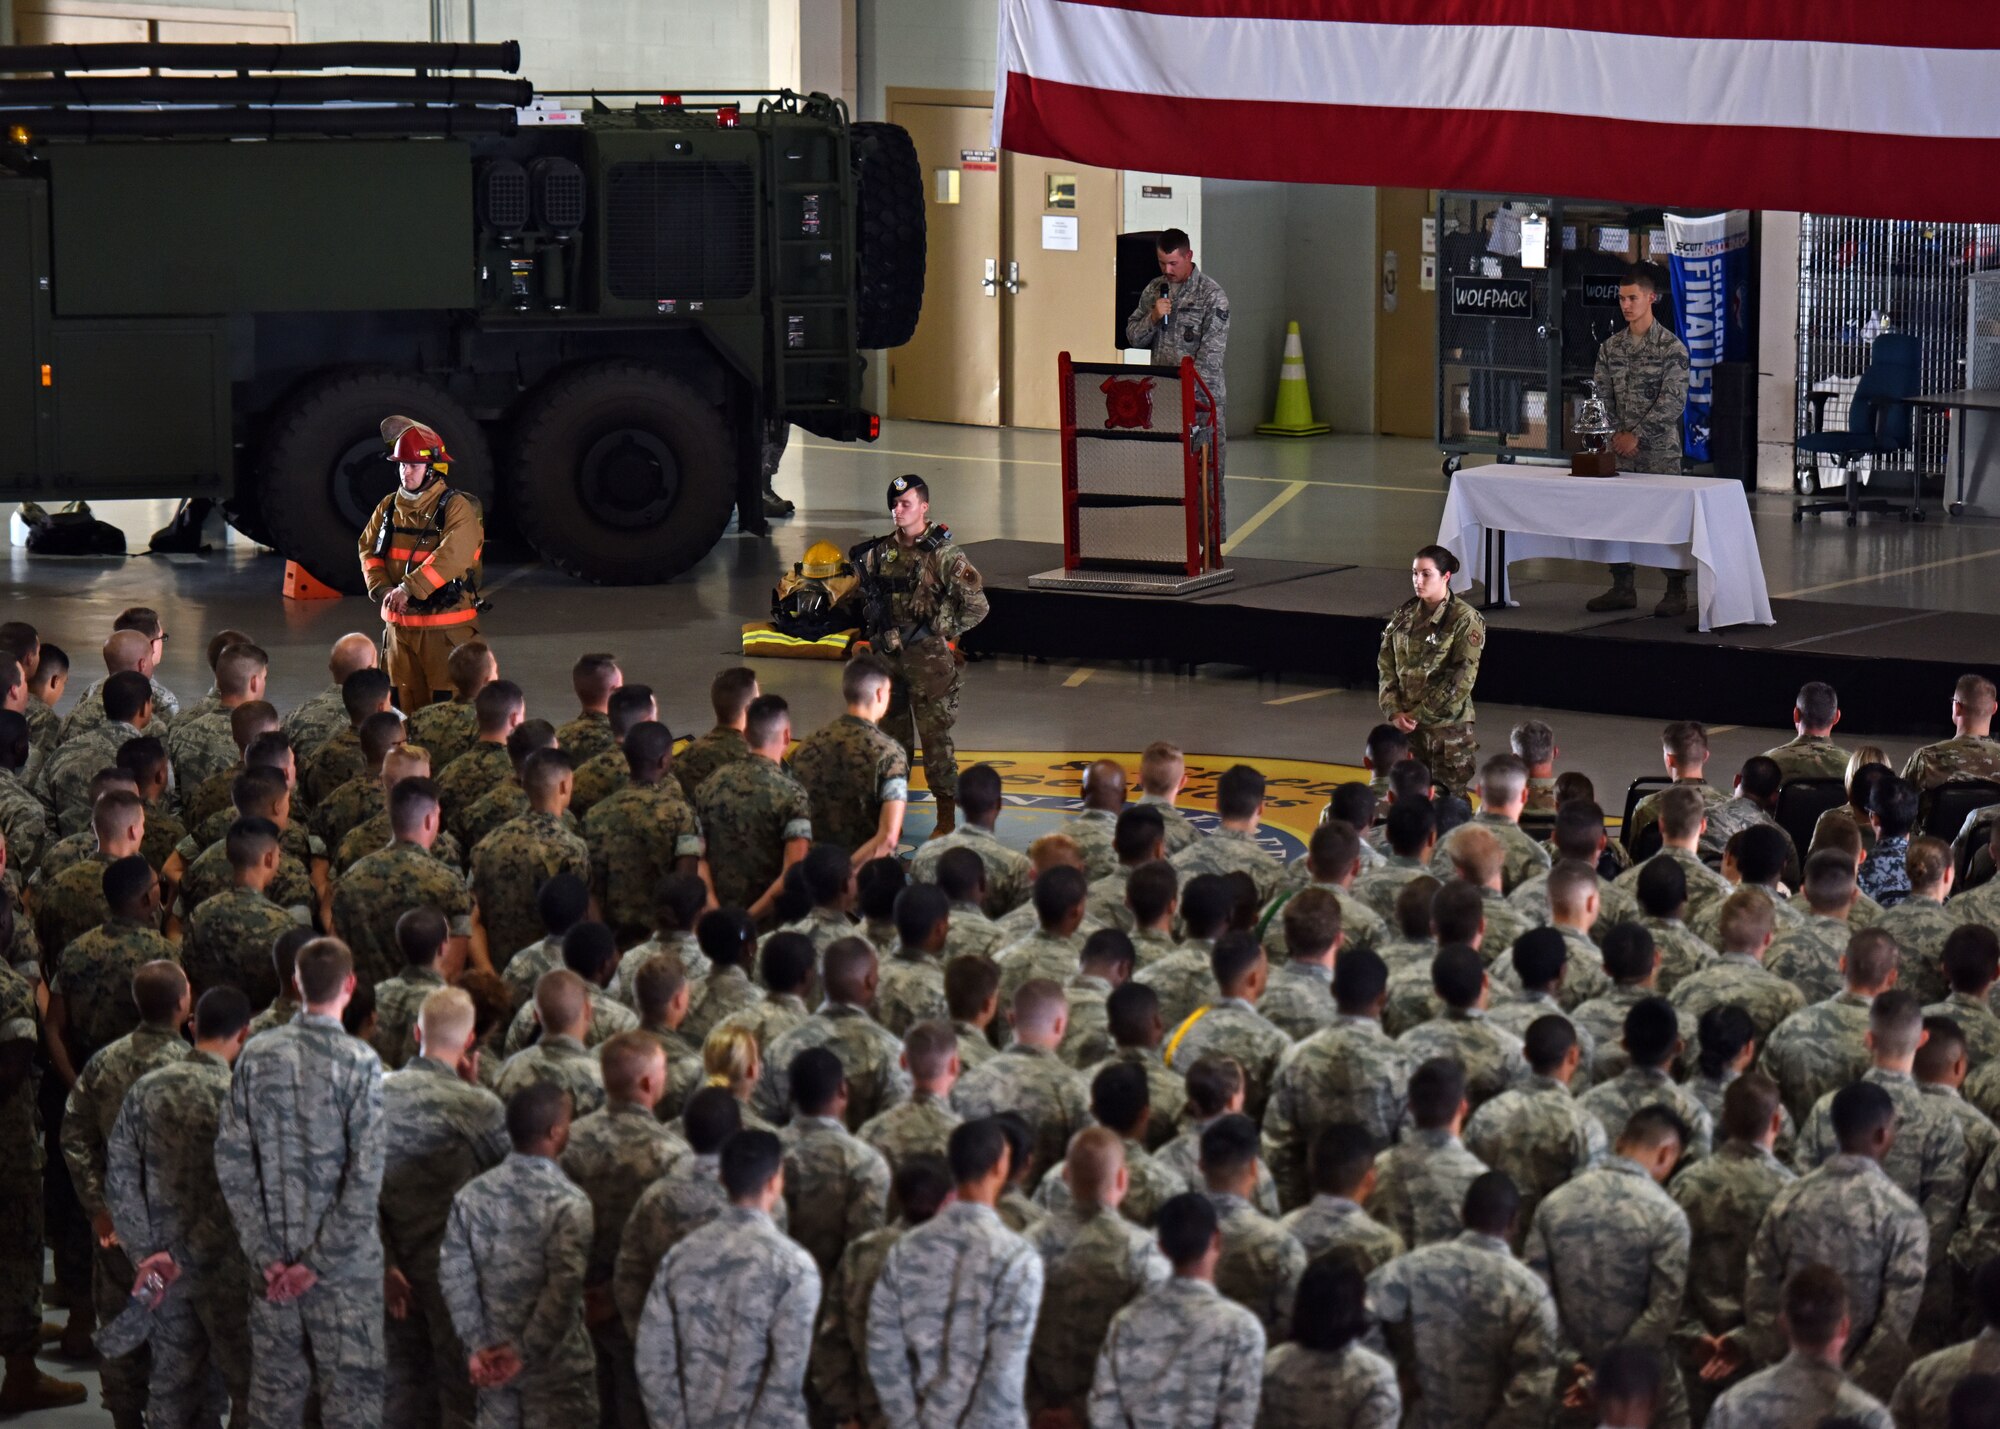 Students of the 312th Training Squadron stand in formation at the Firefighter Remembrance Ceremony in the Department of Defense Louis F. Garland Fire Academy on Goodfellow Air Force, Texas, Sept. 11, 2019. The 312th TRS trains, develops and inspires warriors to deliver fire emergence services for the Department of Defense and America’s international partners. (U.S. Air Force photo by Senior Airman Seraiah Wolf/Released)